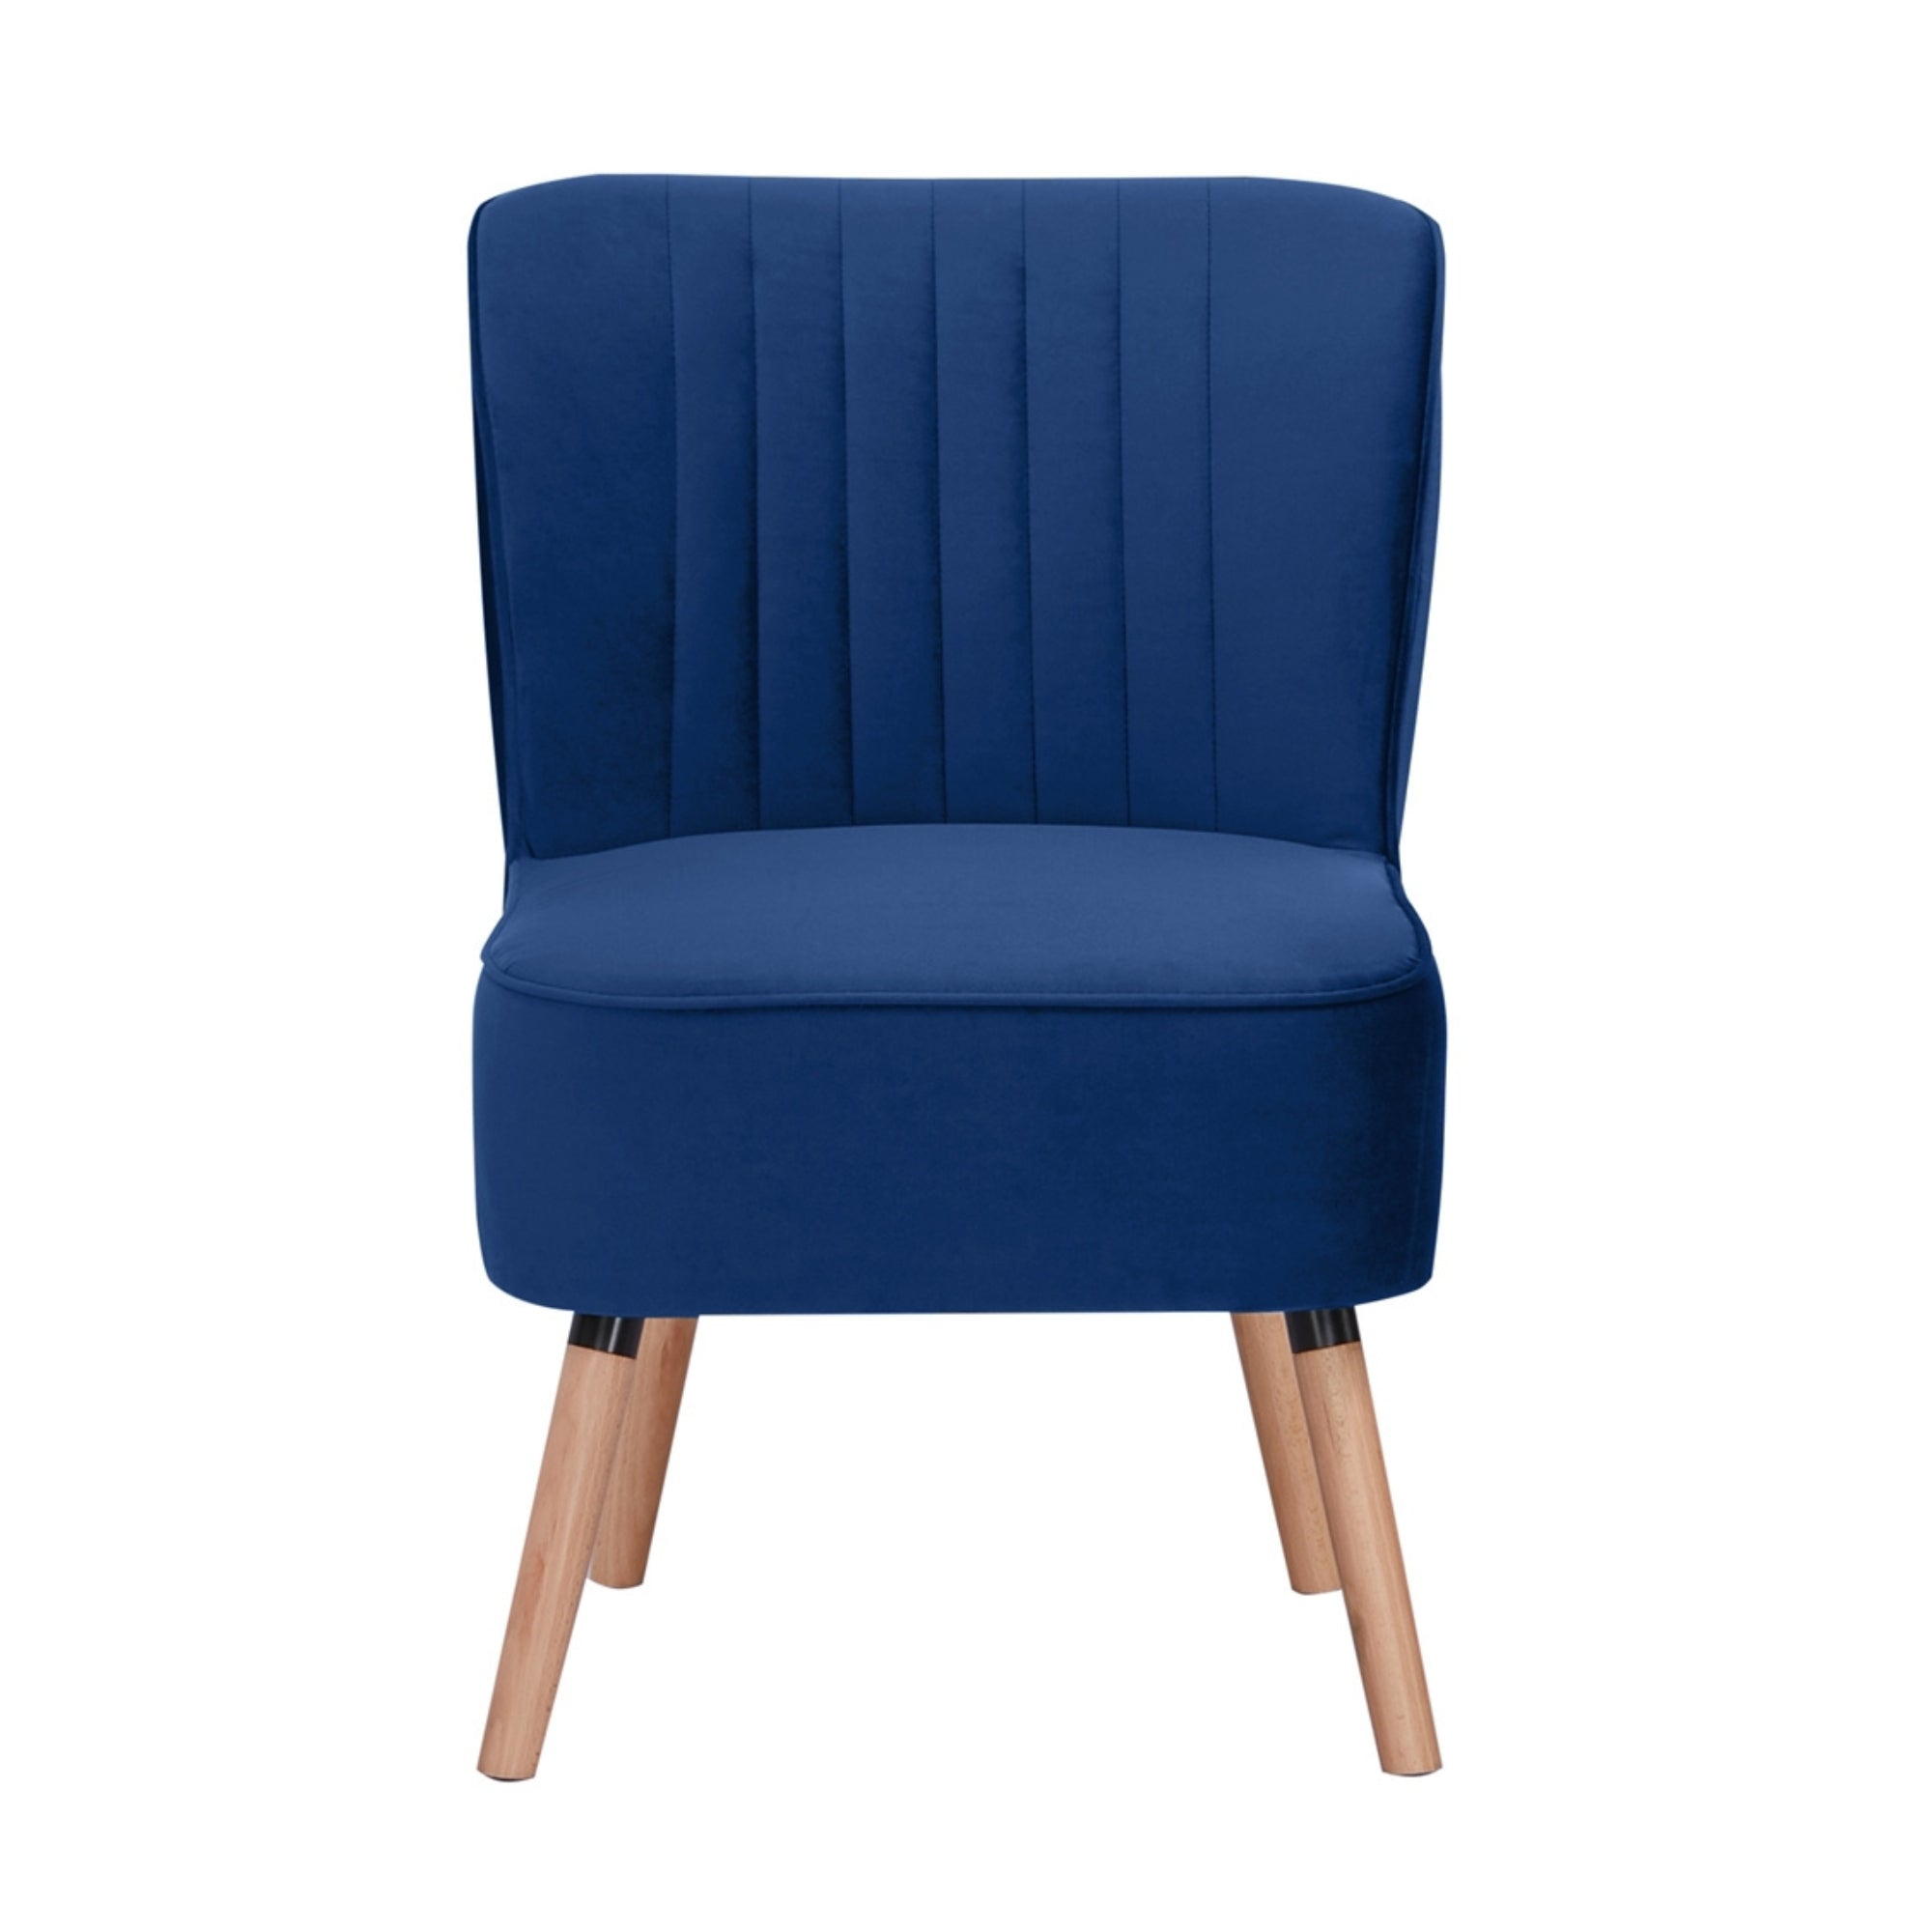 2pc Blue Upholstered Accent Chairs, Solid Wood Frame